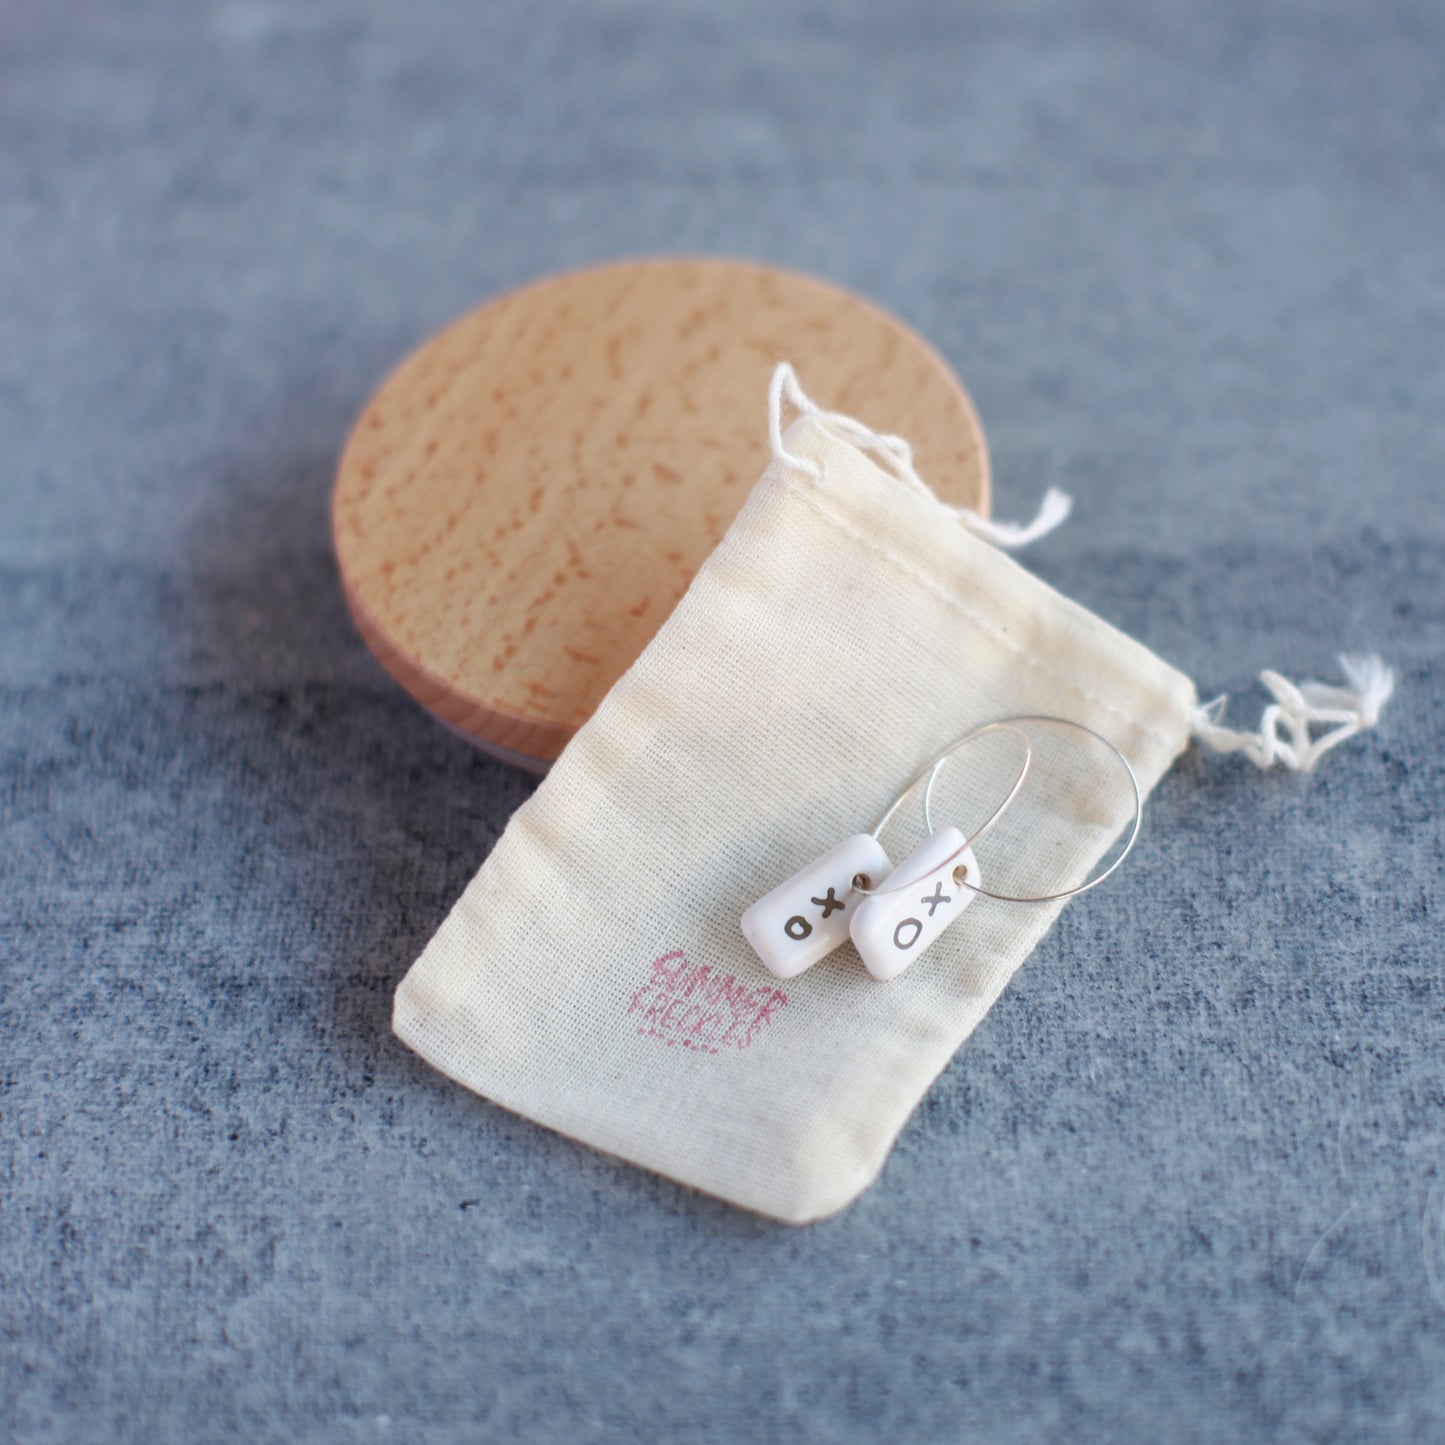 Handmade Ceramic Earrings with Silver Detail